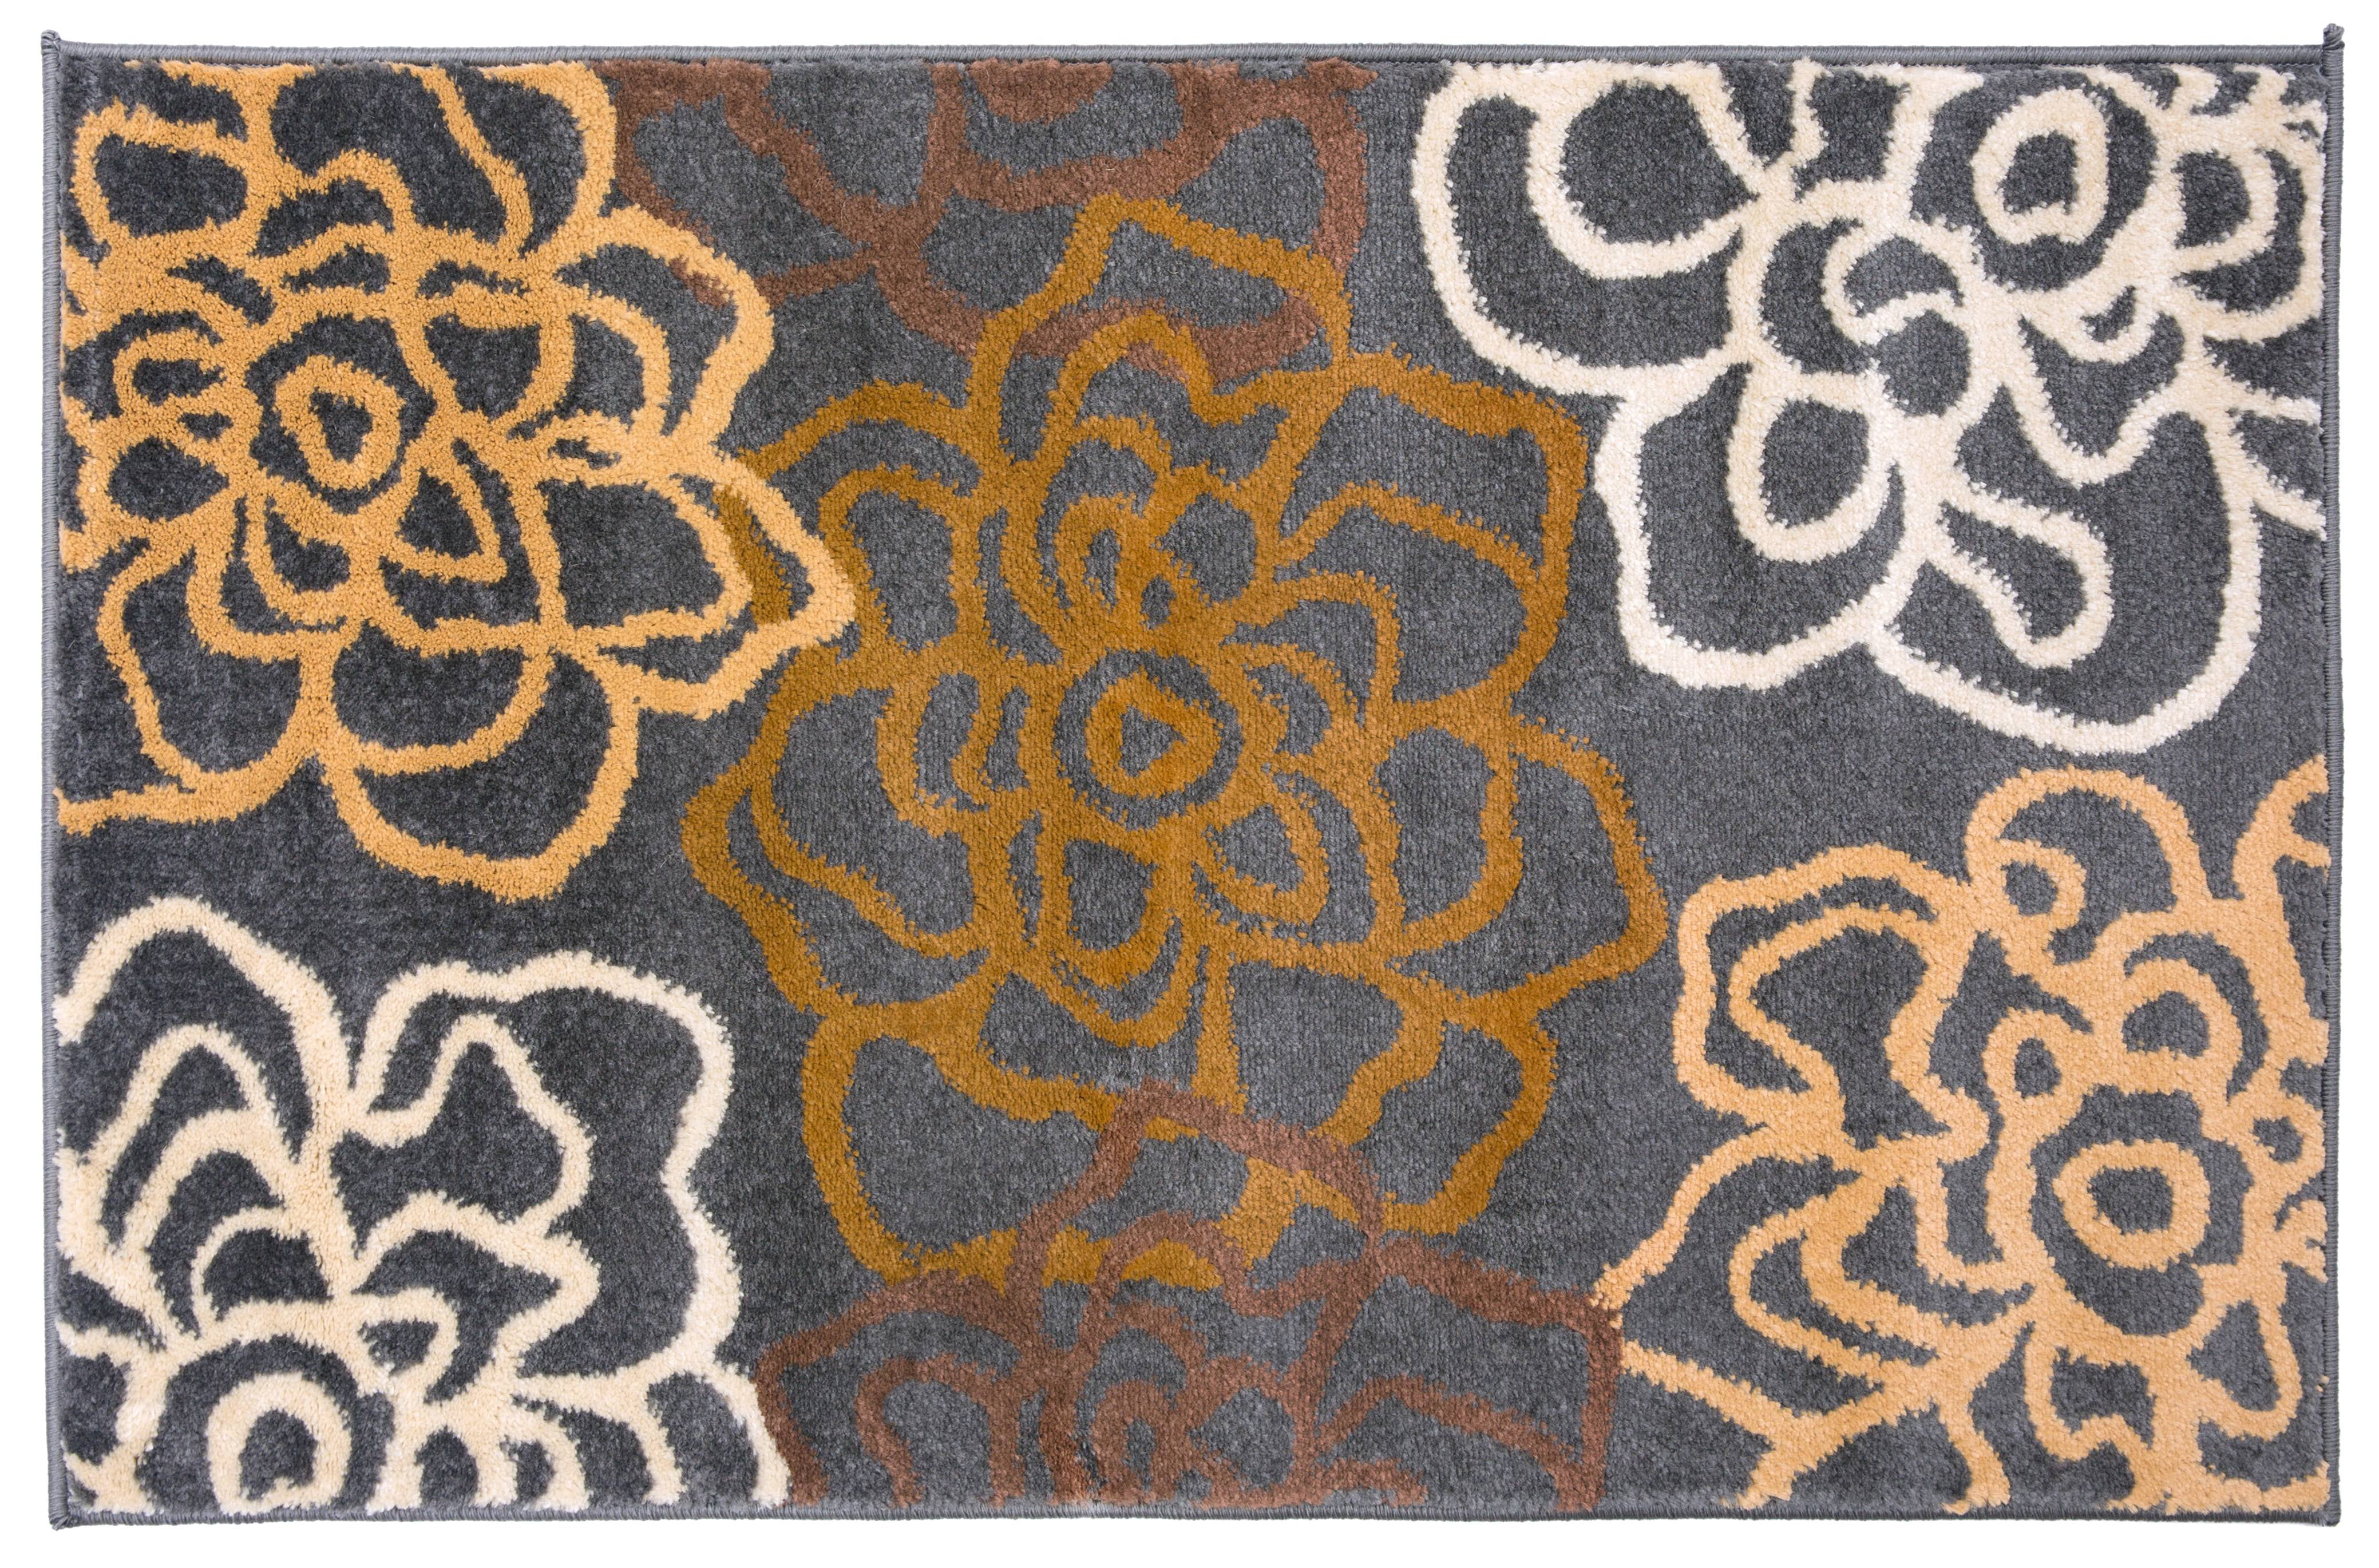 Rugshop Contemporary Modern Floral Flowers Area Rug 2 x 3 Cream World Rug Gallery